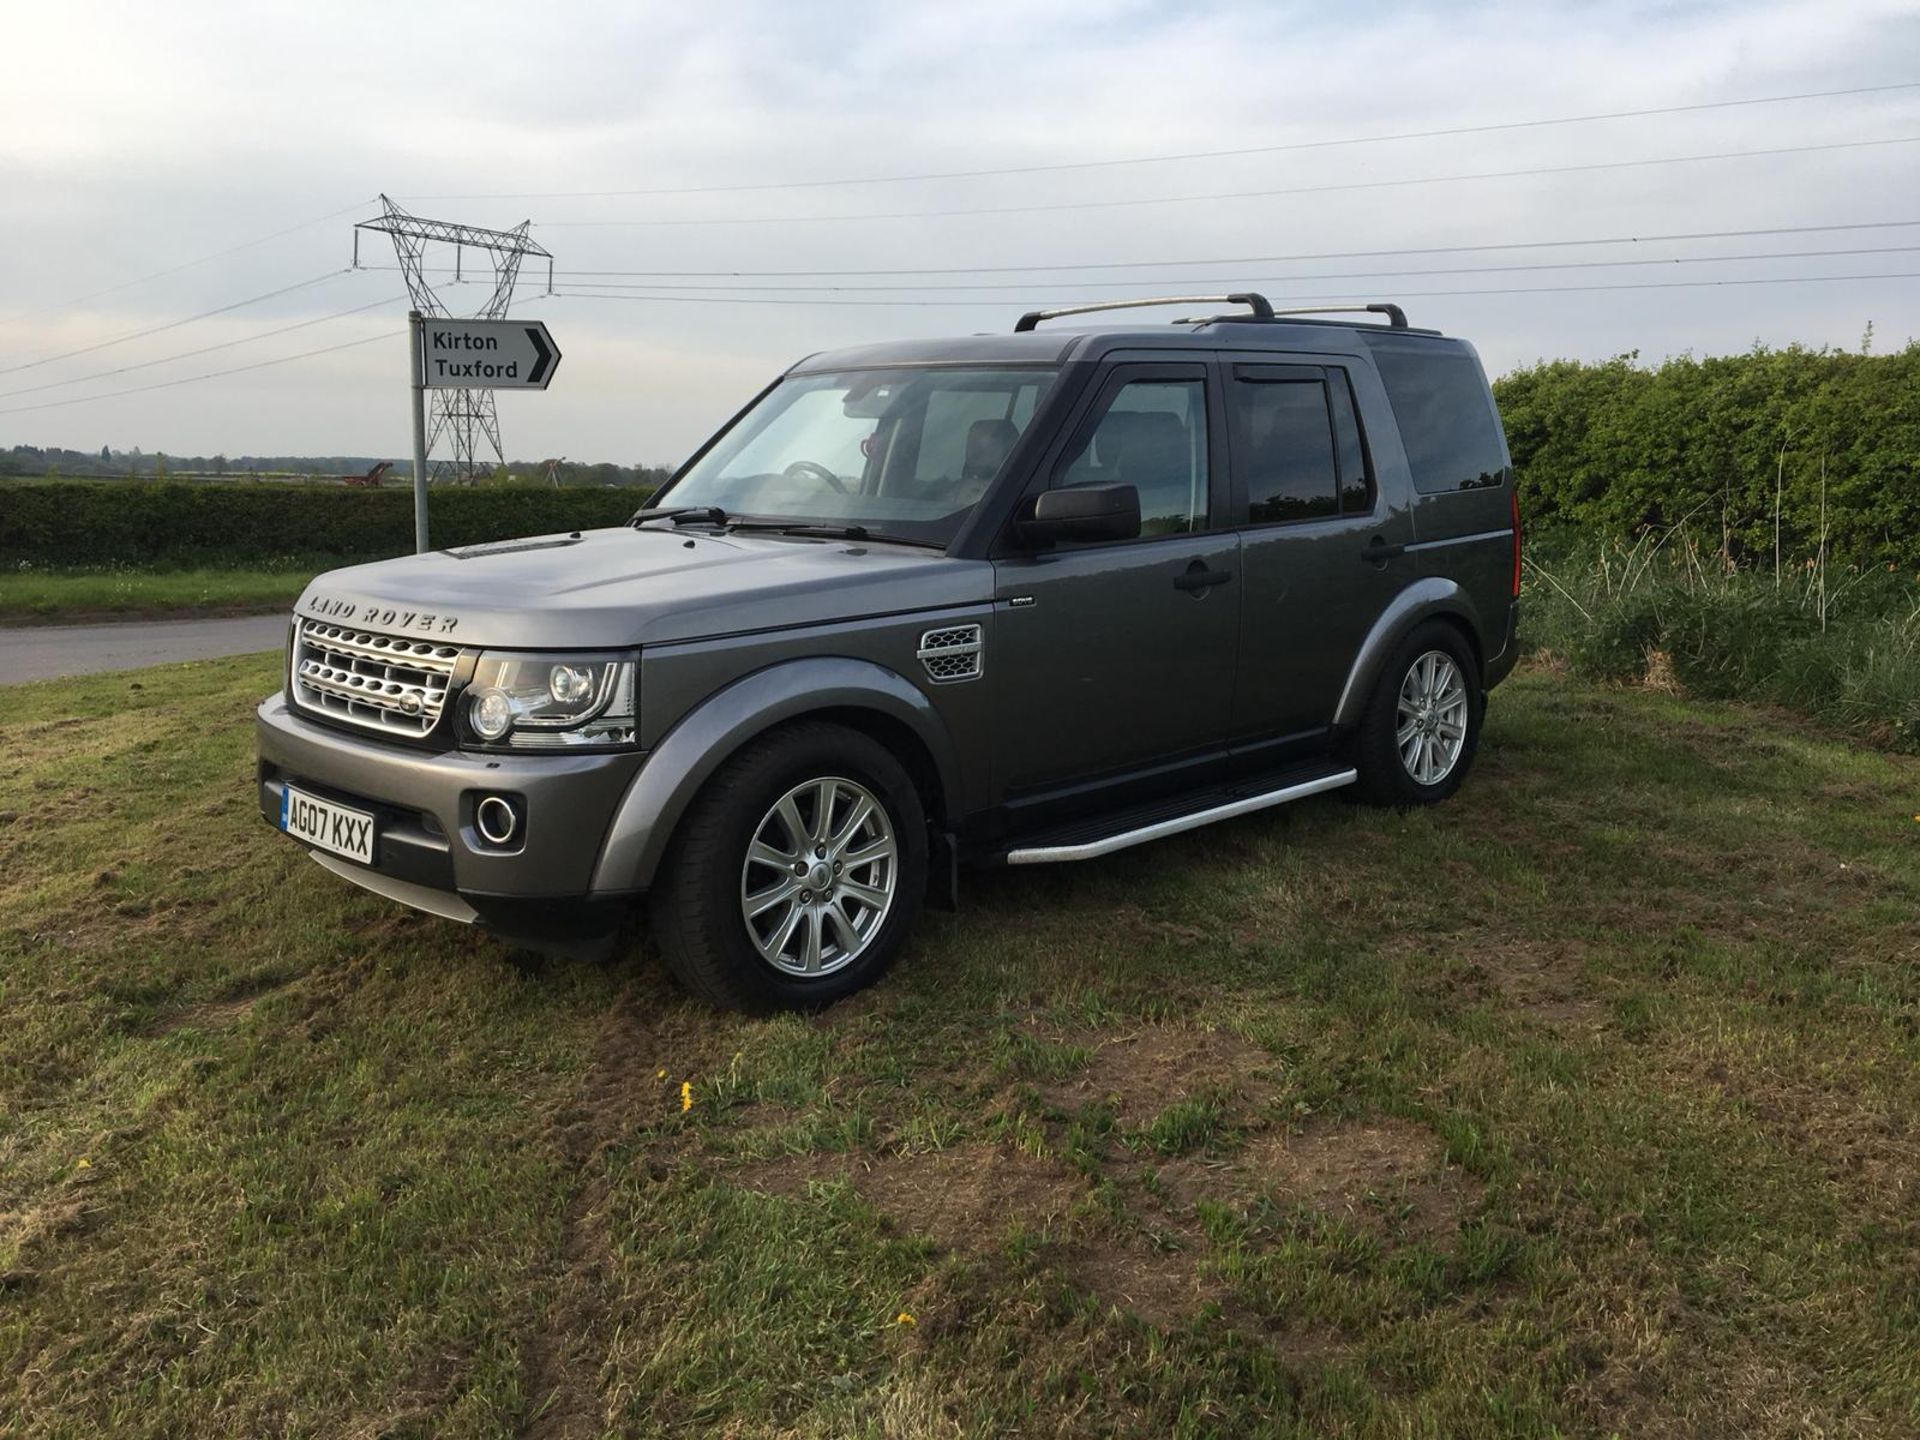 2007/07 REG LAND ROVER DISCOVERY 3 TDV6 SE AUTOMATIC 2.7 DIESEL 4X4, 7 SEATS, FACE-LIFT *NO VAT* - Image 4 of 16